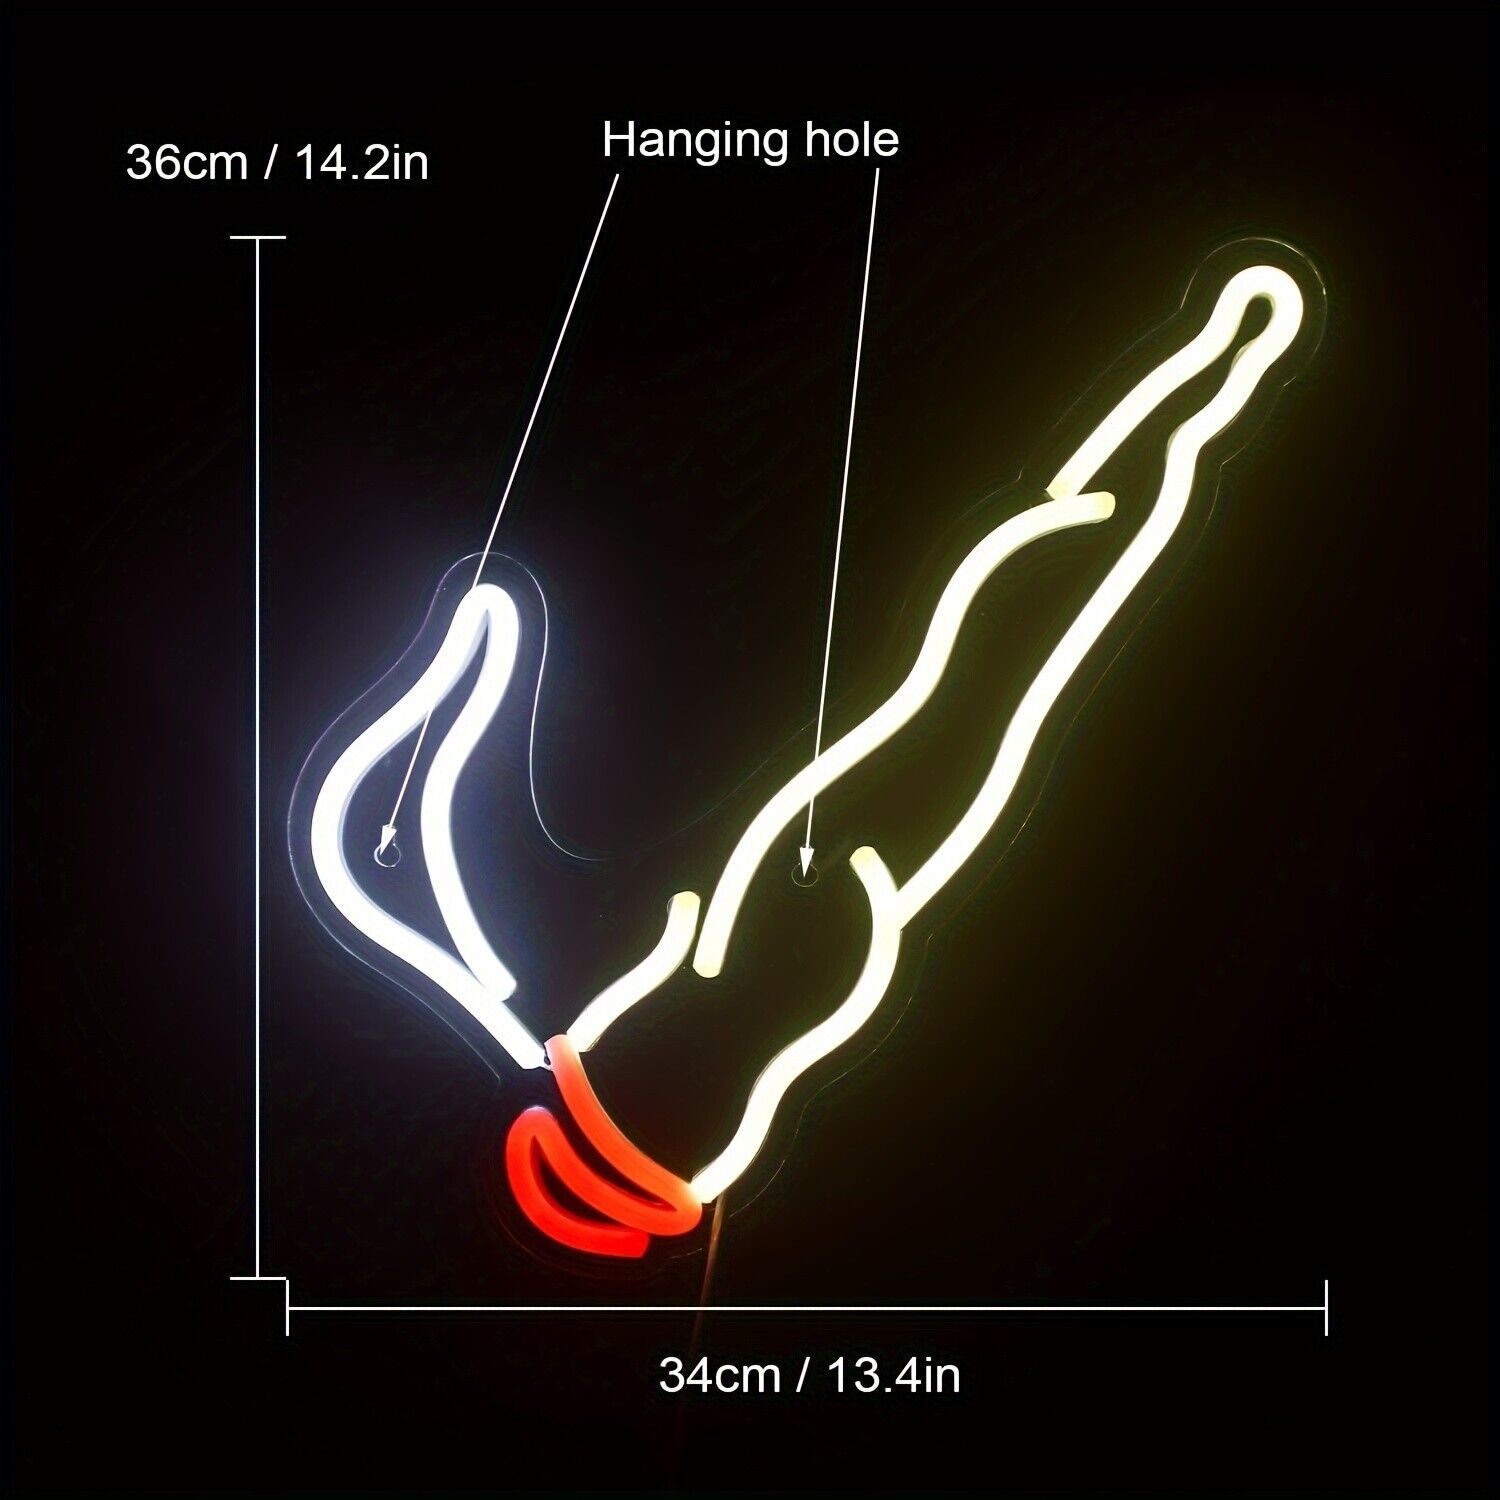 UponRay Match design LED neon lights are used for wall decoration, creating a un